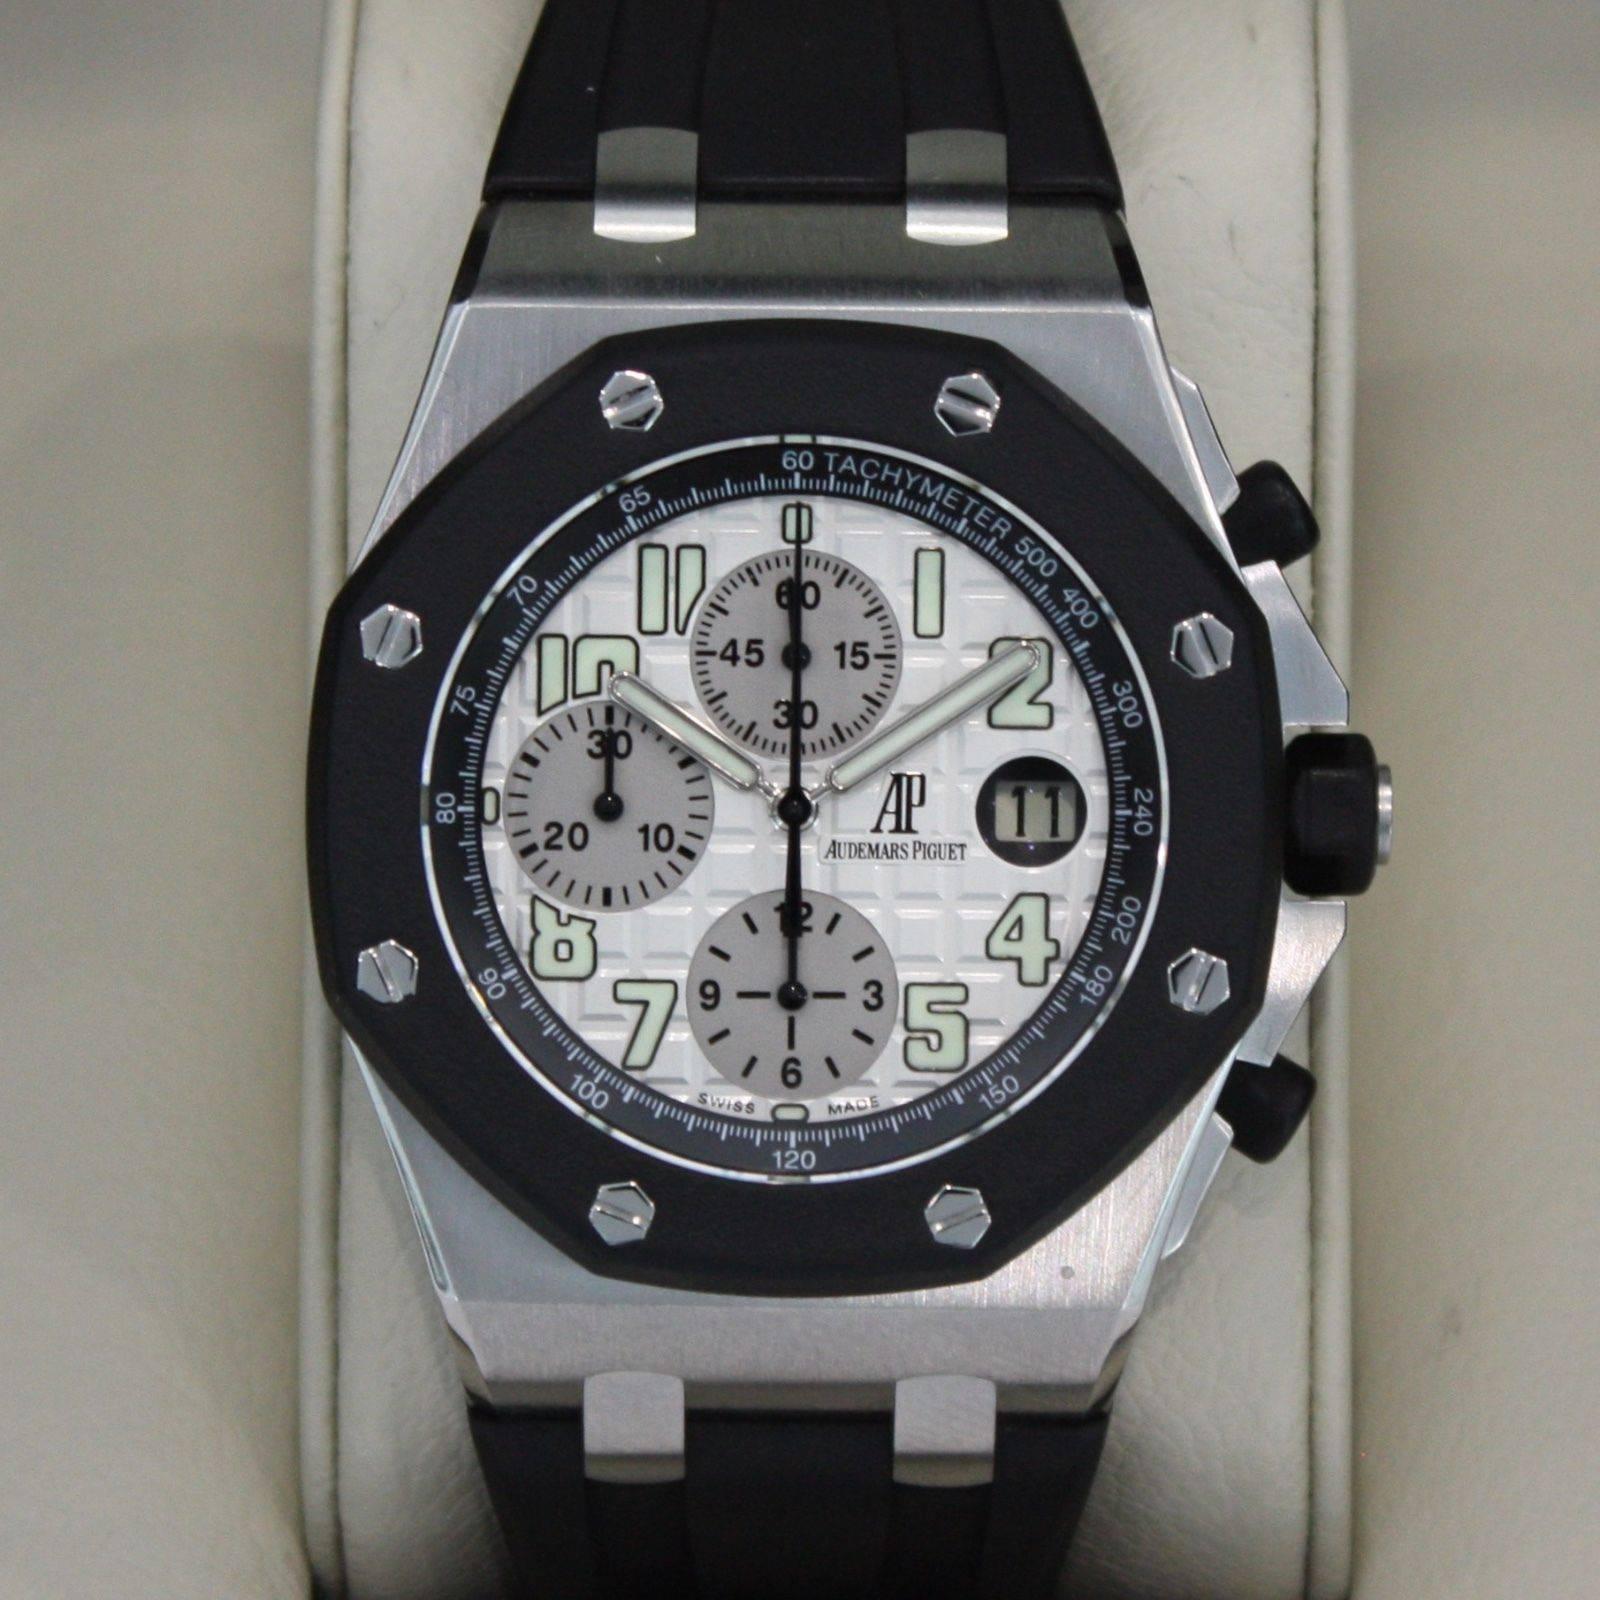 Brand Name: Audemars Piguet
Style Number: 25940SK.OO.D002CA.02.A
Series: Royal Oak Offshore Rubberclad
Gender: Men's
Case Material: Stainless Steel 
Dial Color: Silver (Also Called 